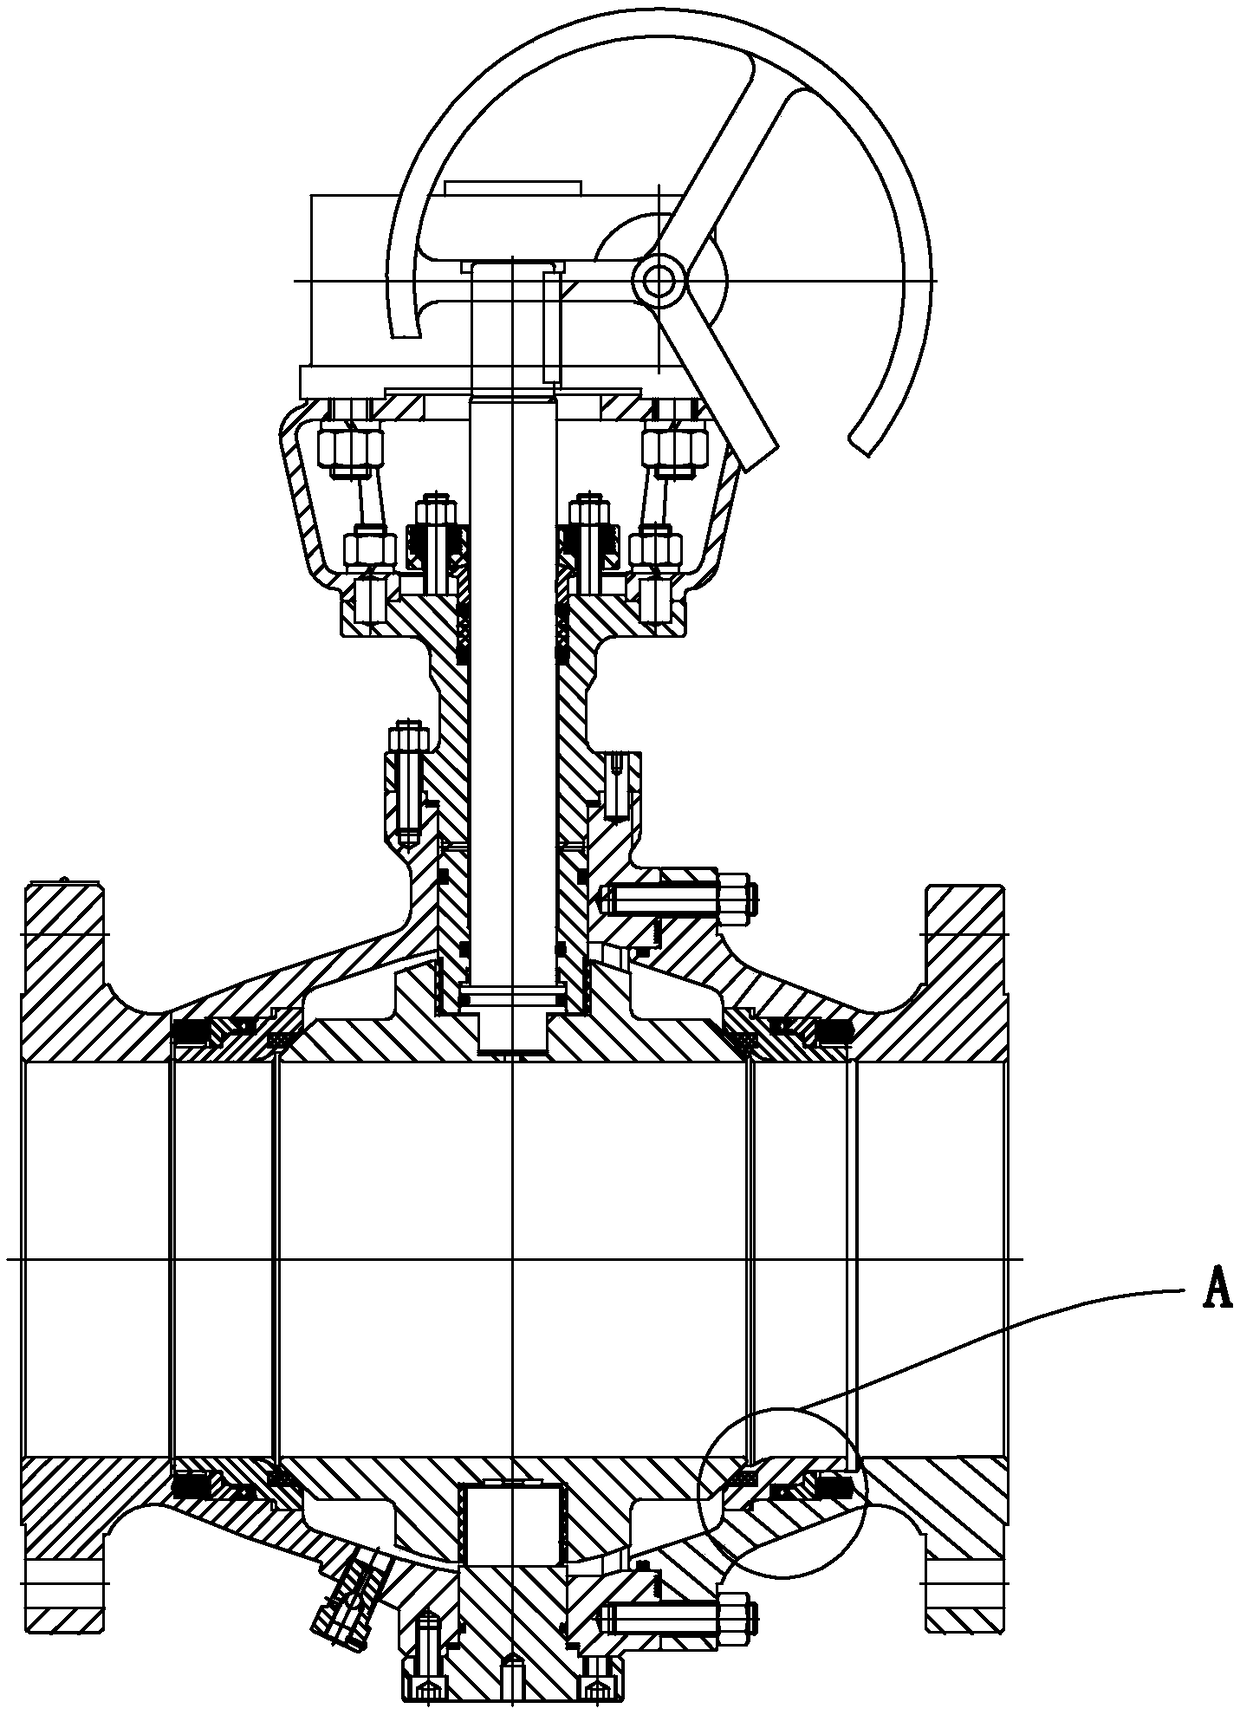 Valve seat sealing mechanism applicable to low temperature working conditions